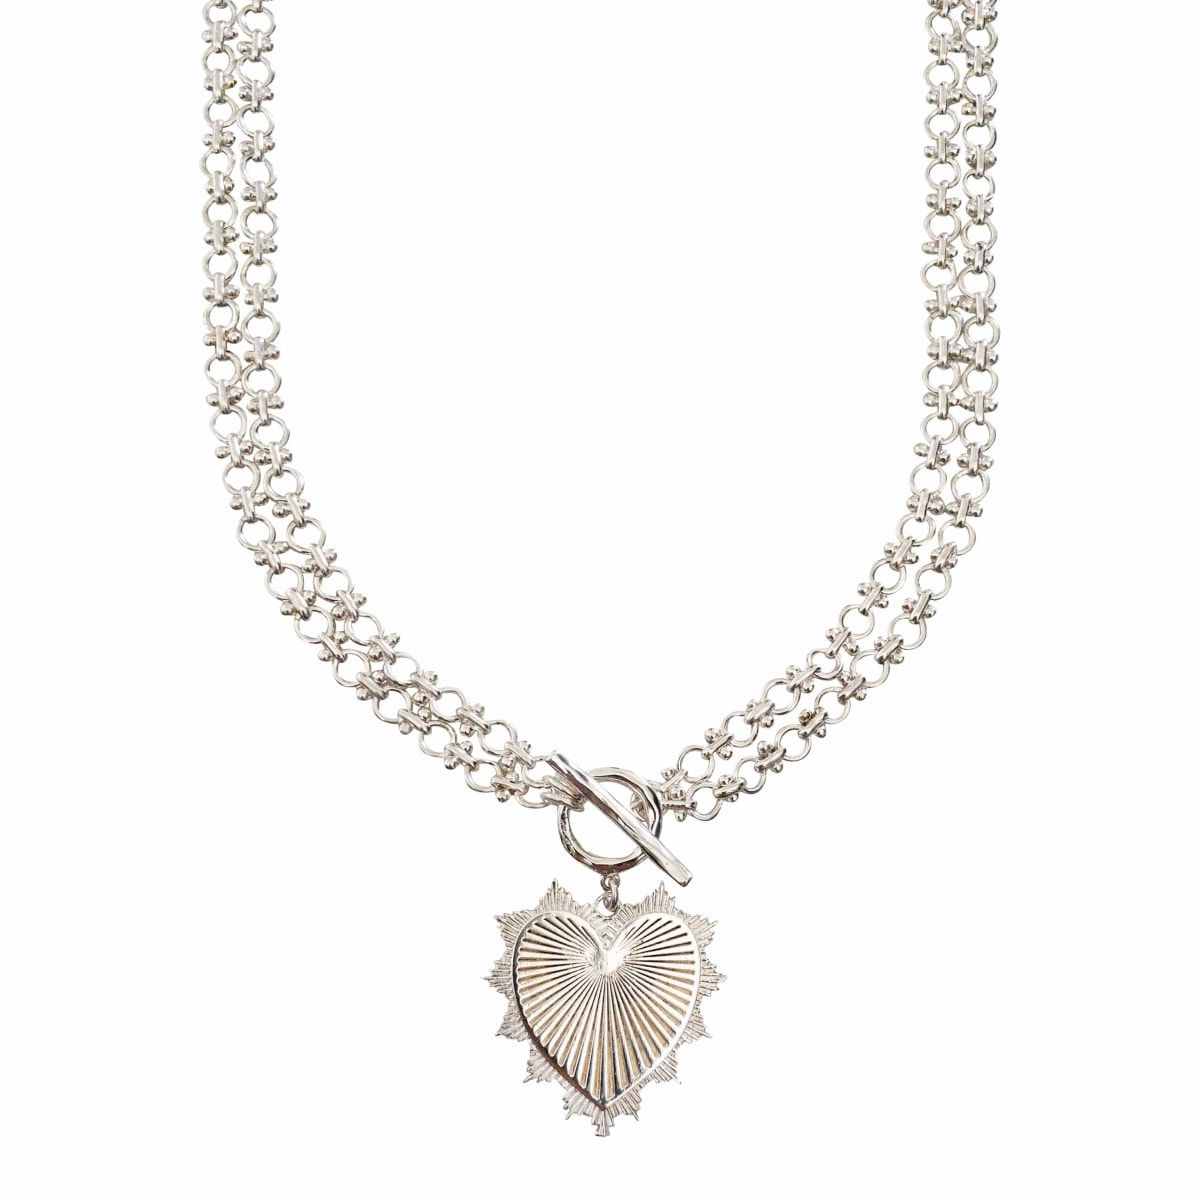 Silver Freya Necklace | Wolf & Badger (US)